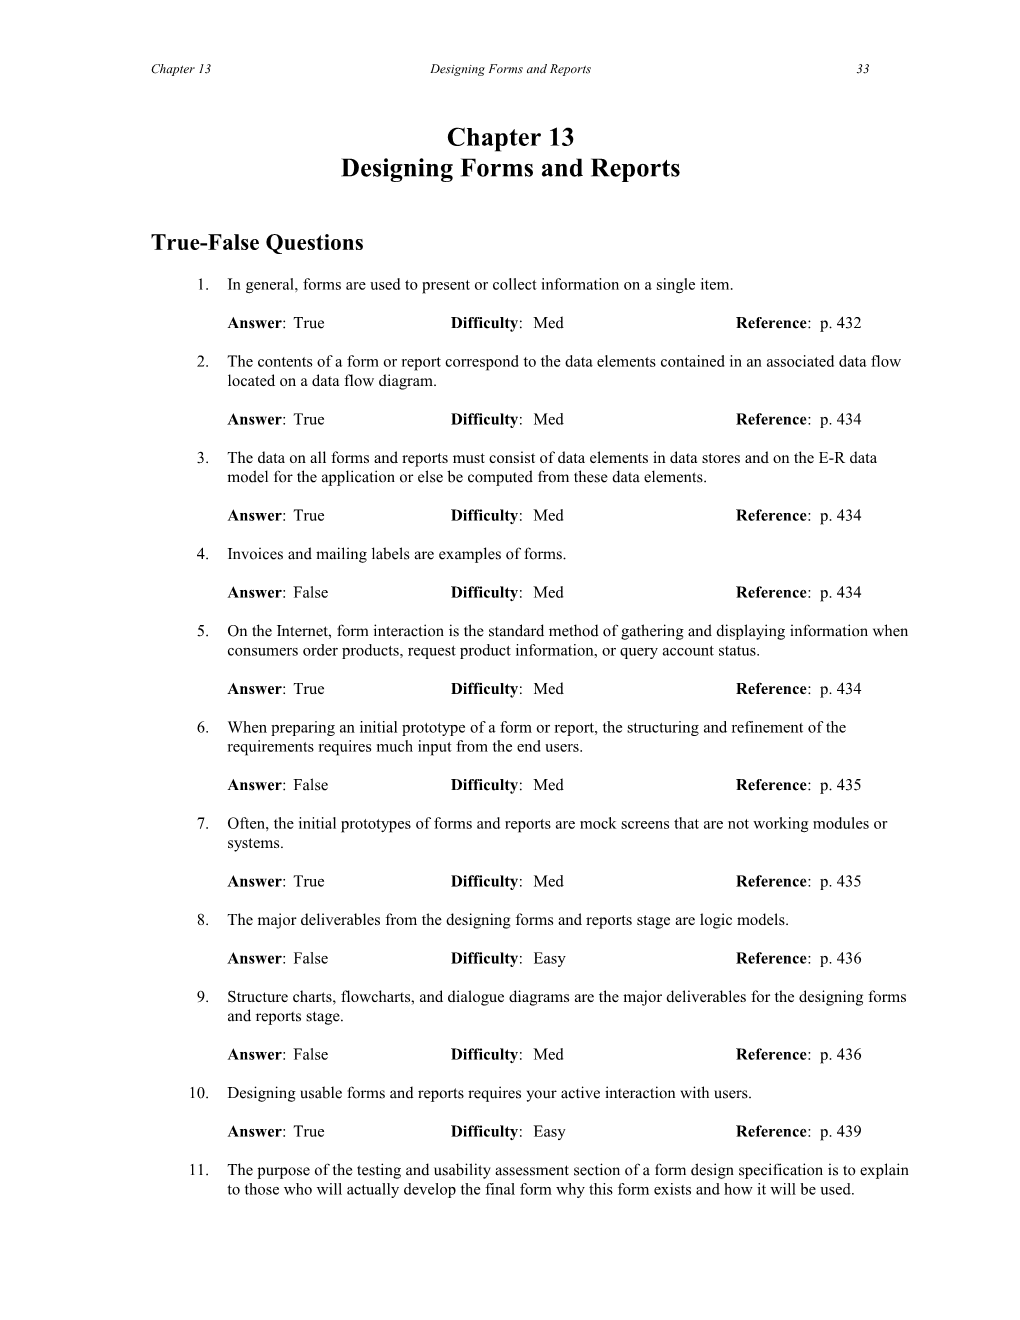 Chapter 13 Designing Forms and Reports 289